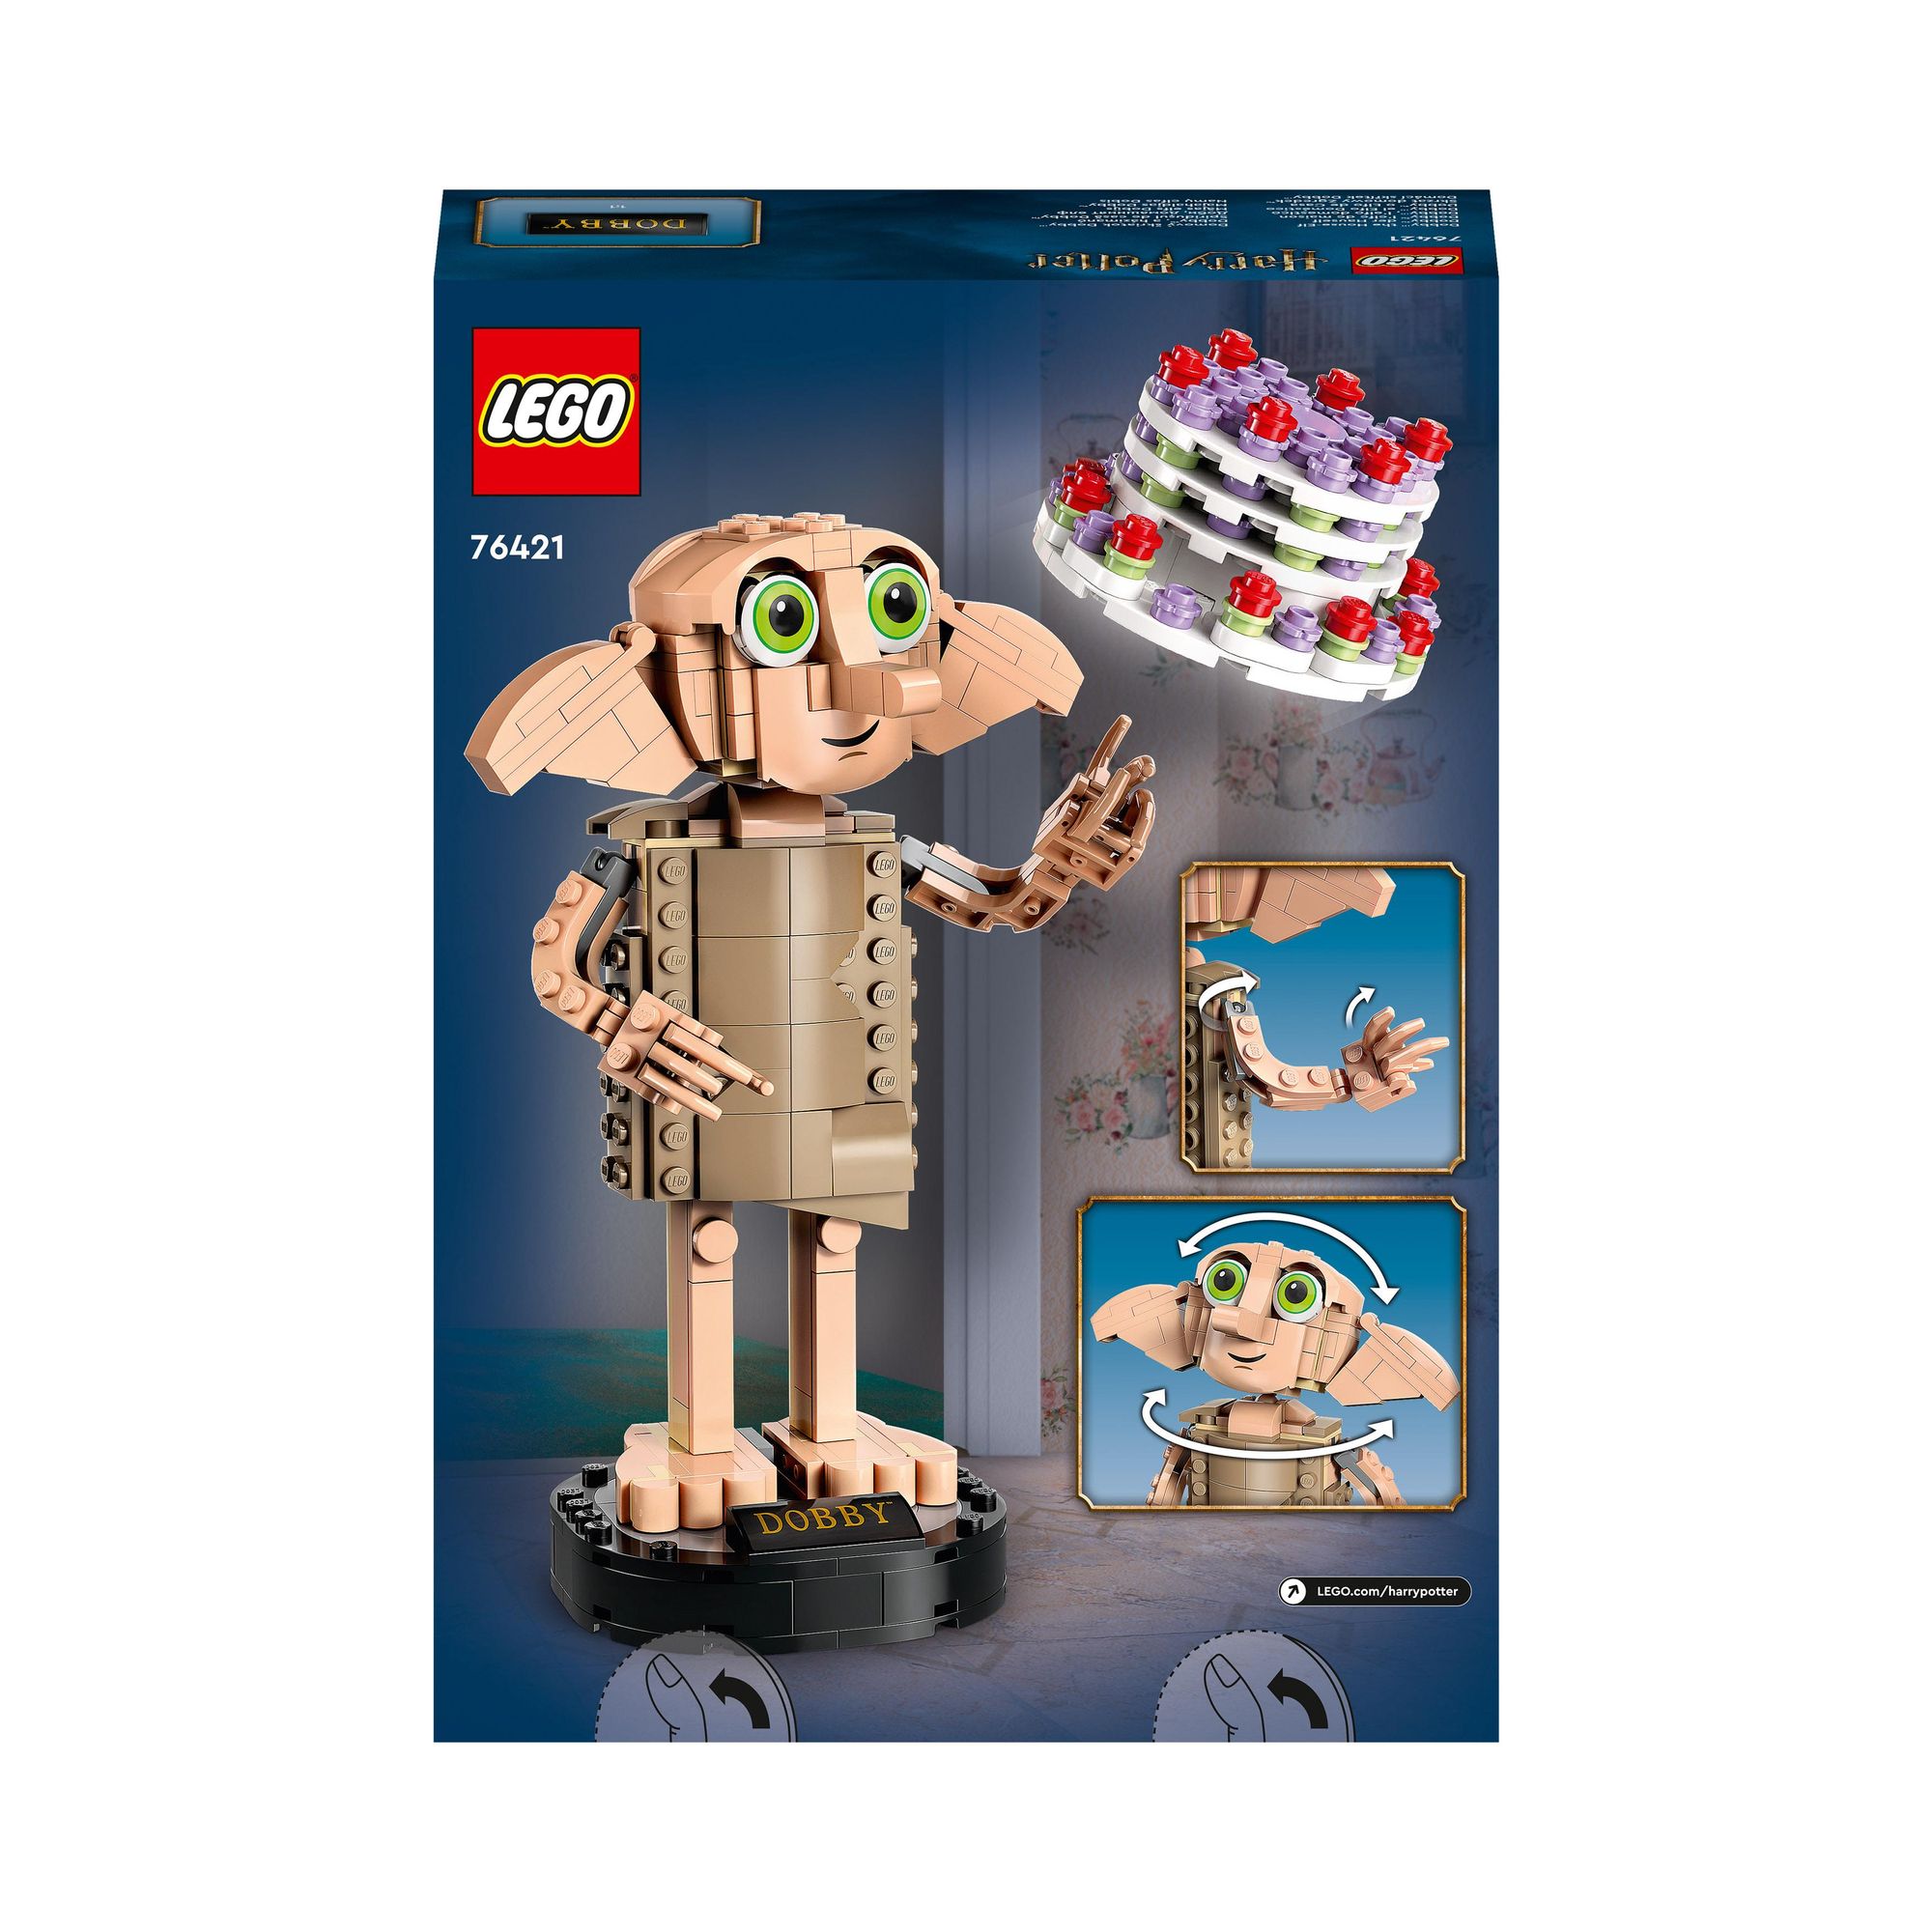 LEGO Harry Potter Dobby the House Elf (76421) First Look - The Brick Fan